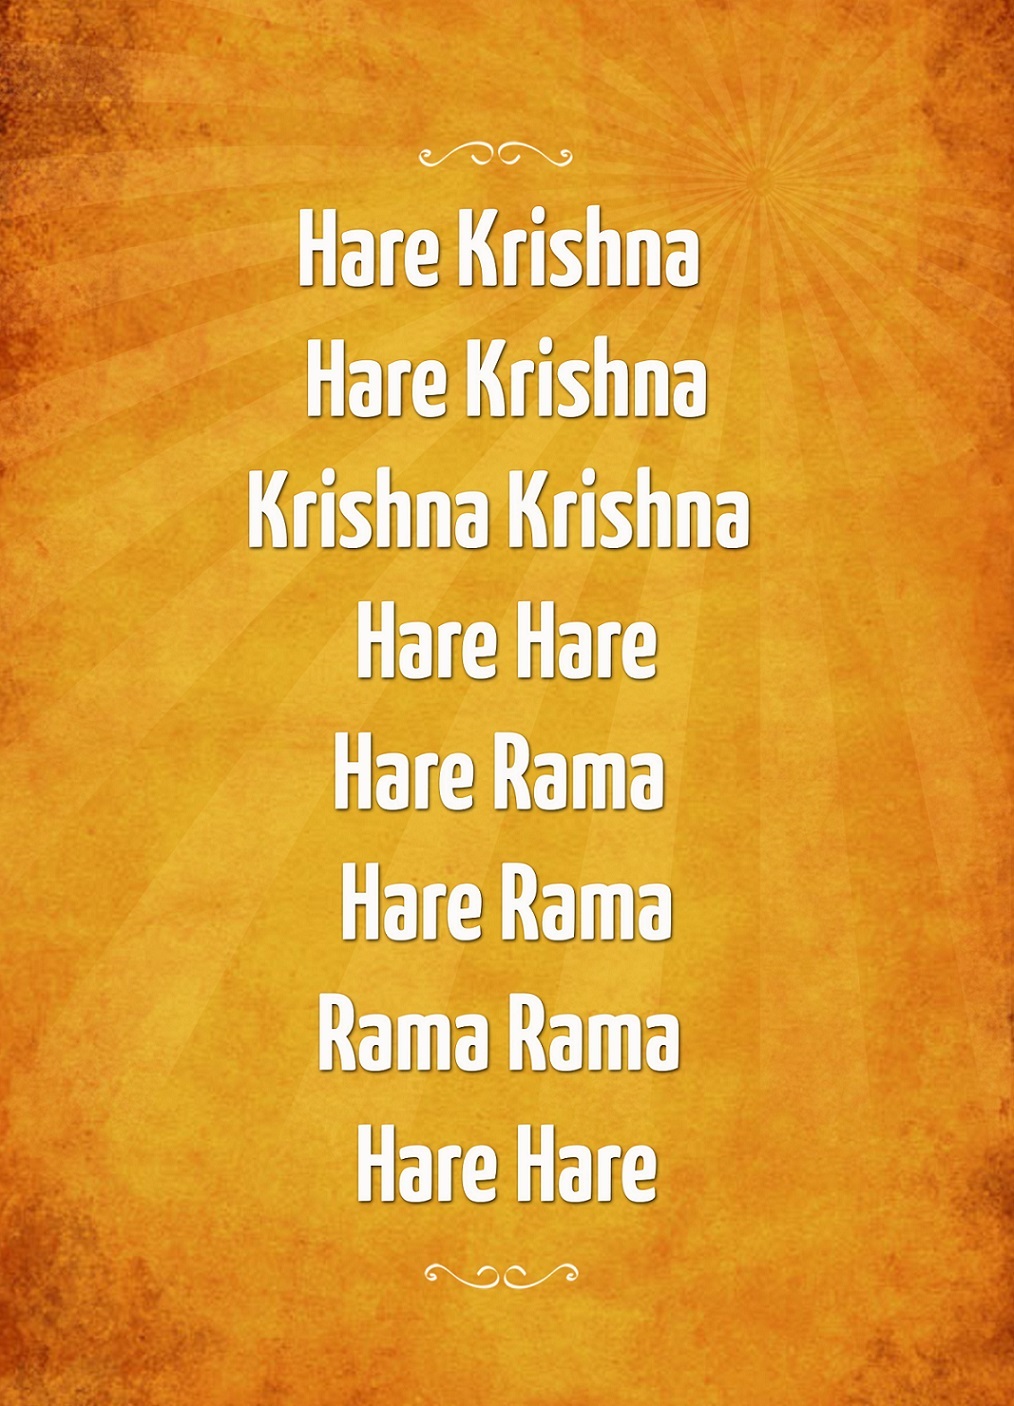 How can chanting the Hare Krishna mantra help people become